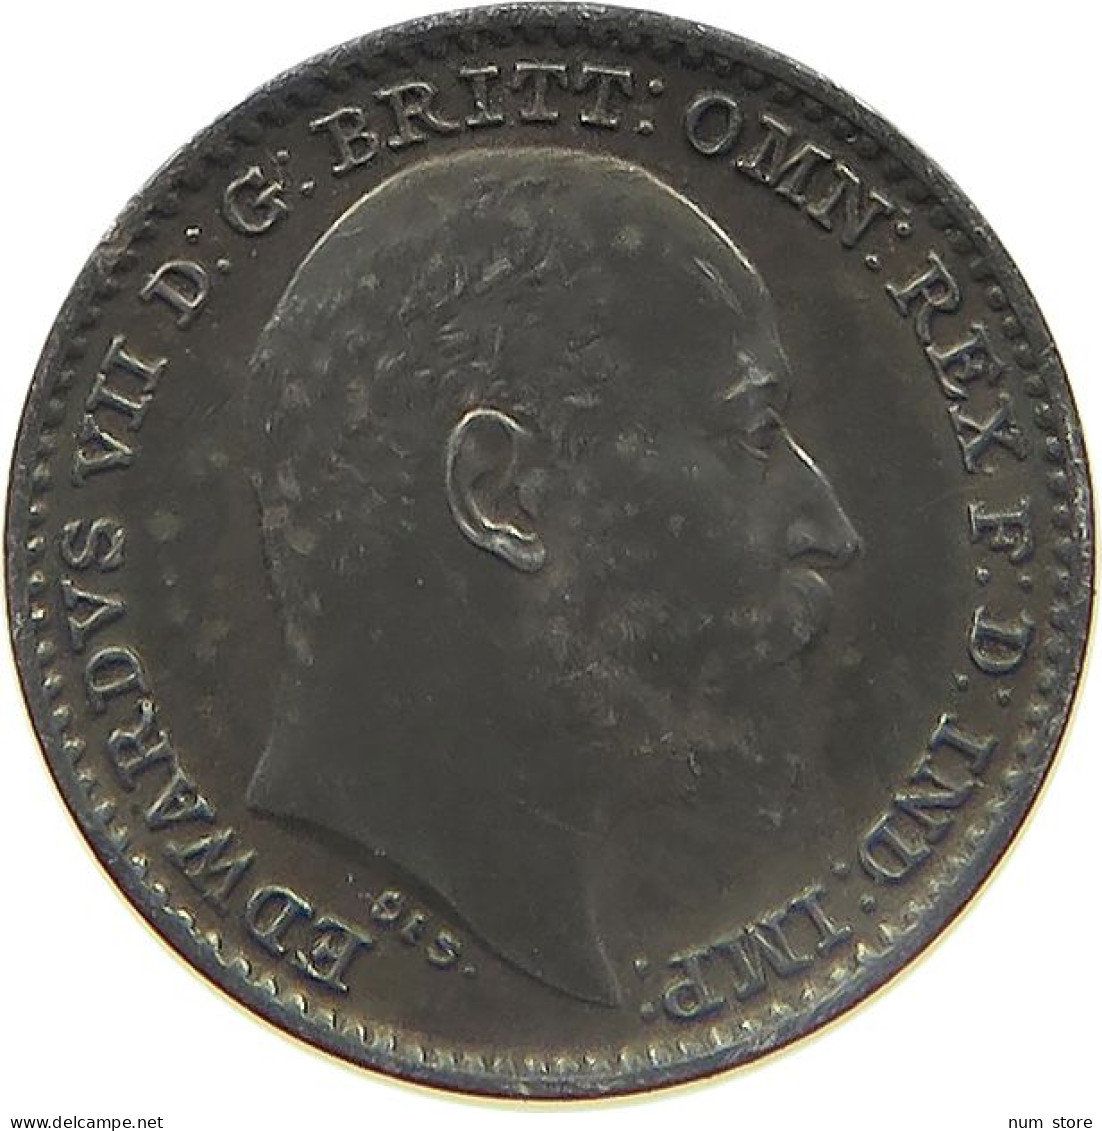 GREAT BRITAIN PENNY 1903 EDWARD VII., 1901 - 1910 #MA 023059 - D. 1 Penny